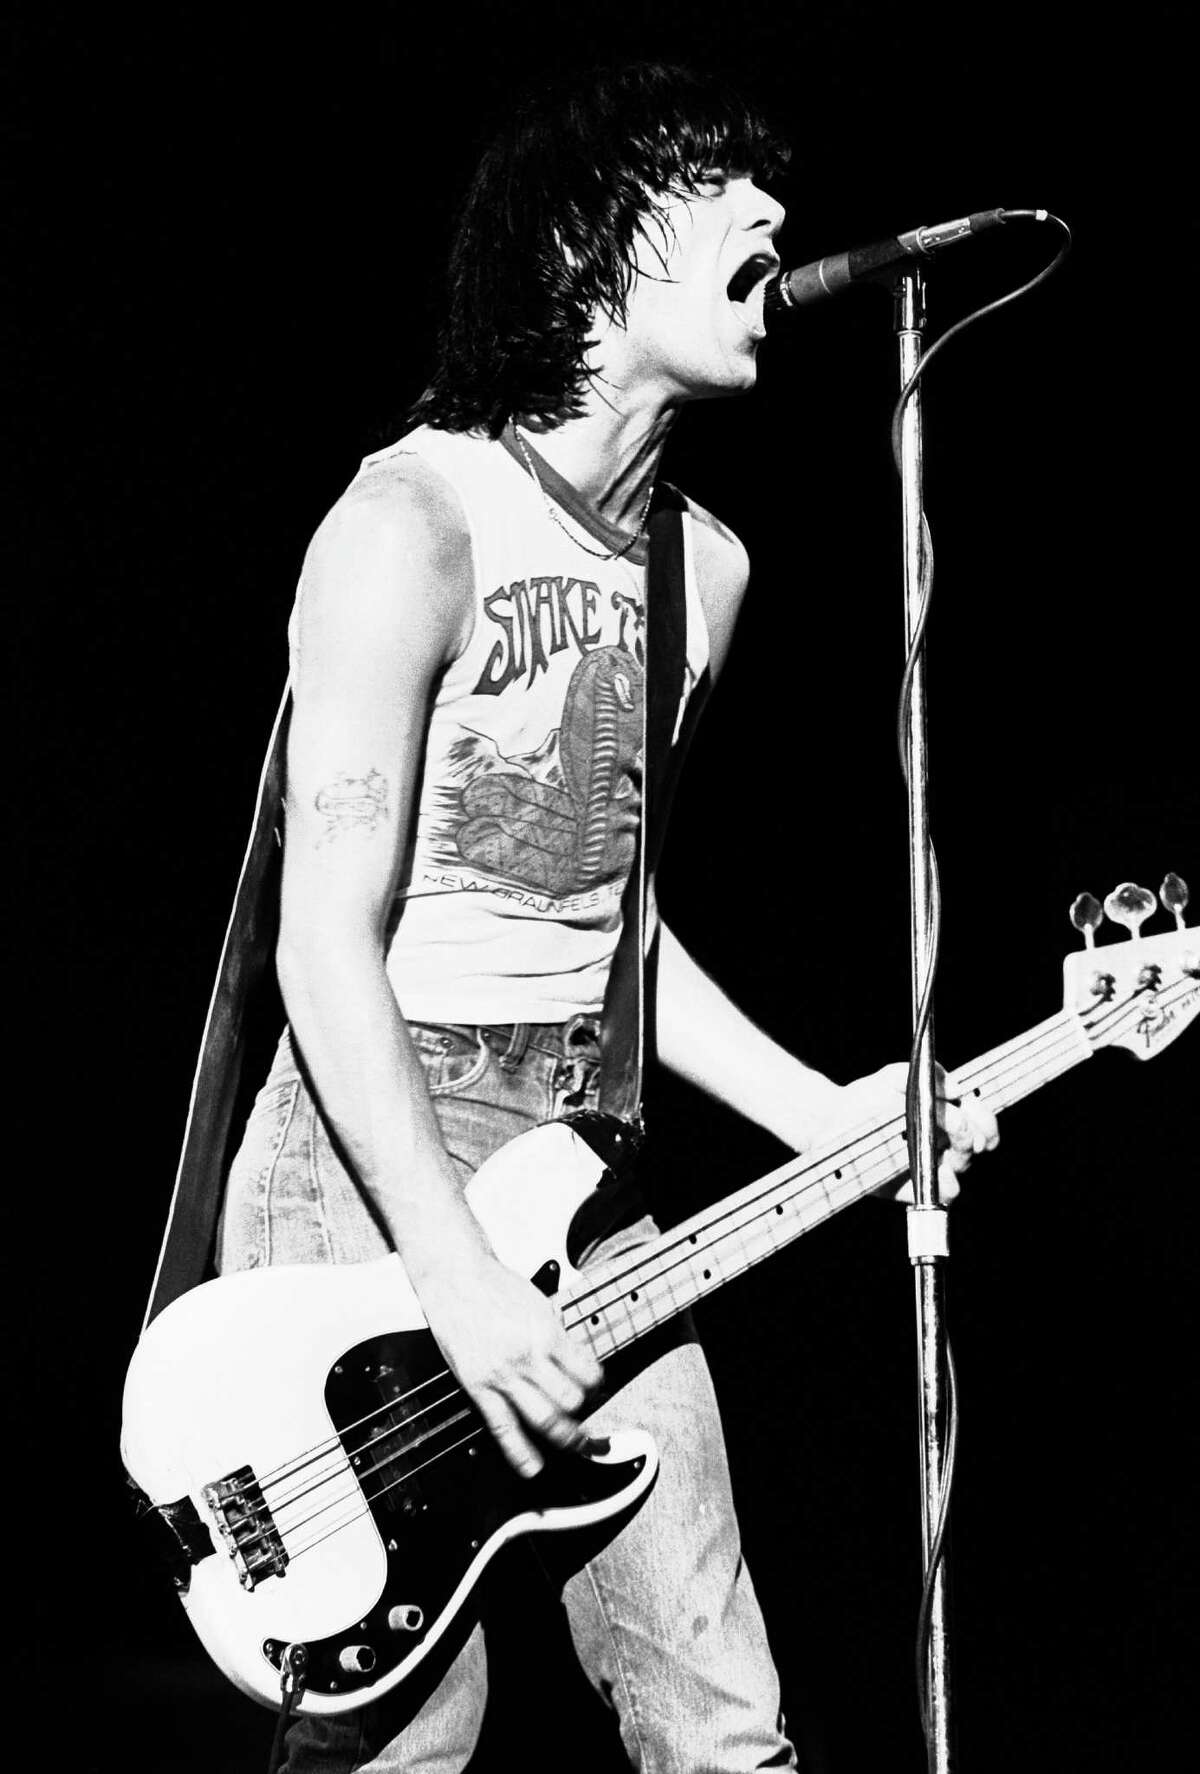 2. While on tour in late 1970s Texas, the Ramones stumbled upon the off-beat roadside stop and incorporated Snake Farm t-shirts into their wardrobe. Replicas of the t-shirts worn by the late Dee Dee Ramone are available online.